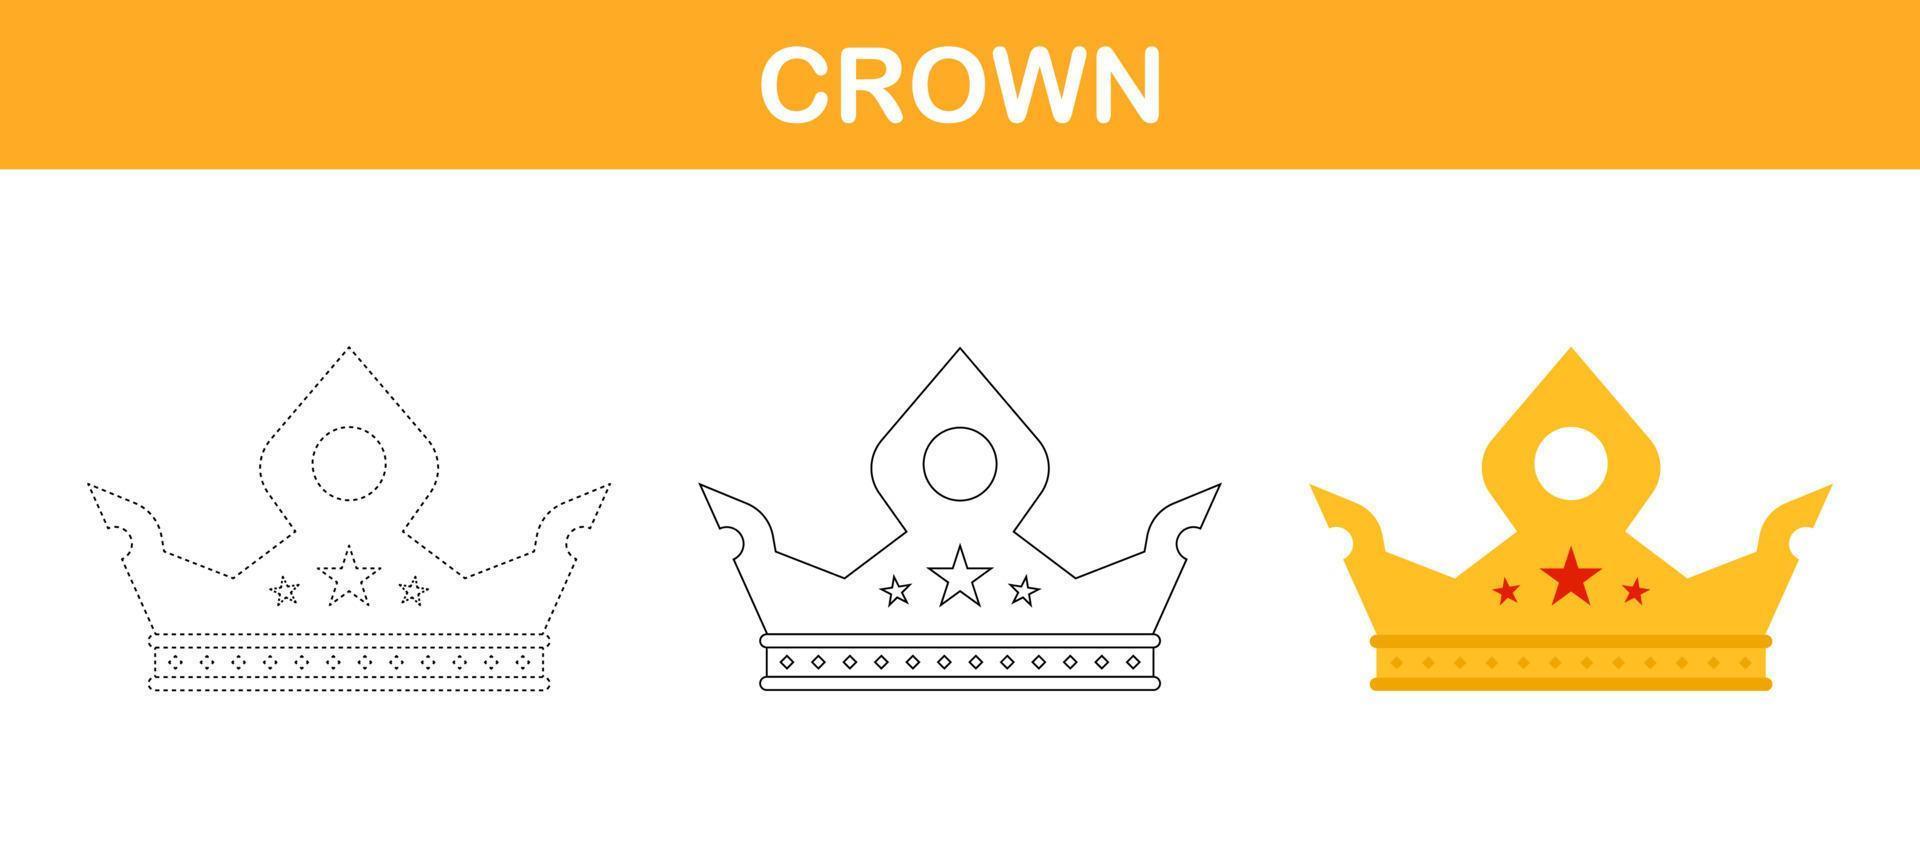 Crown tracing and coloring worksheet for kids vector